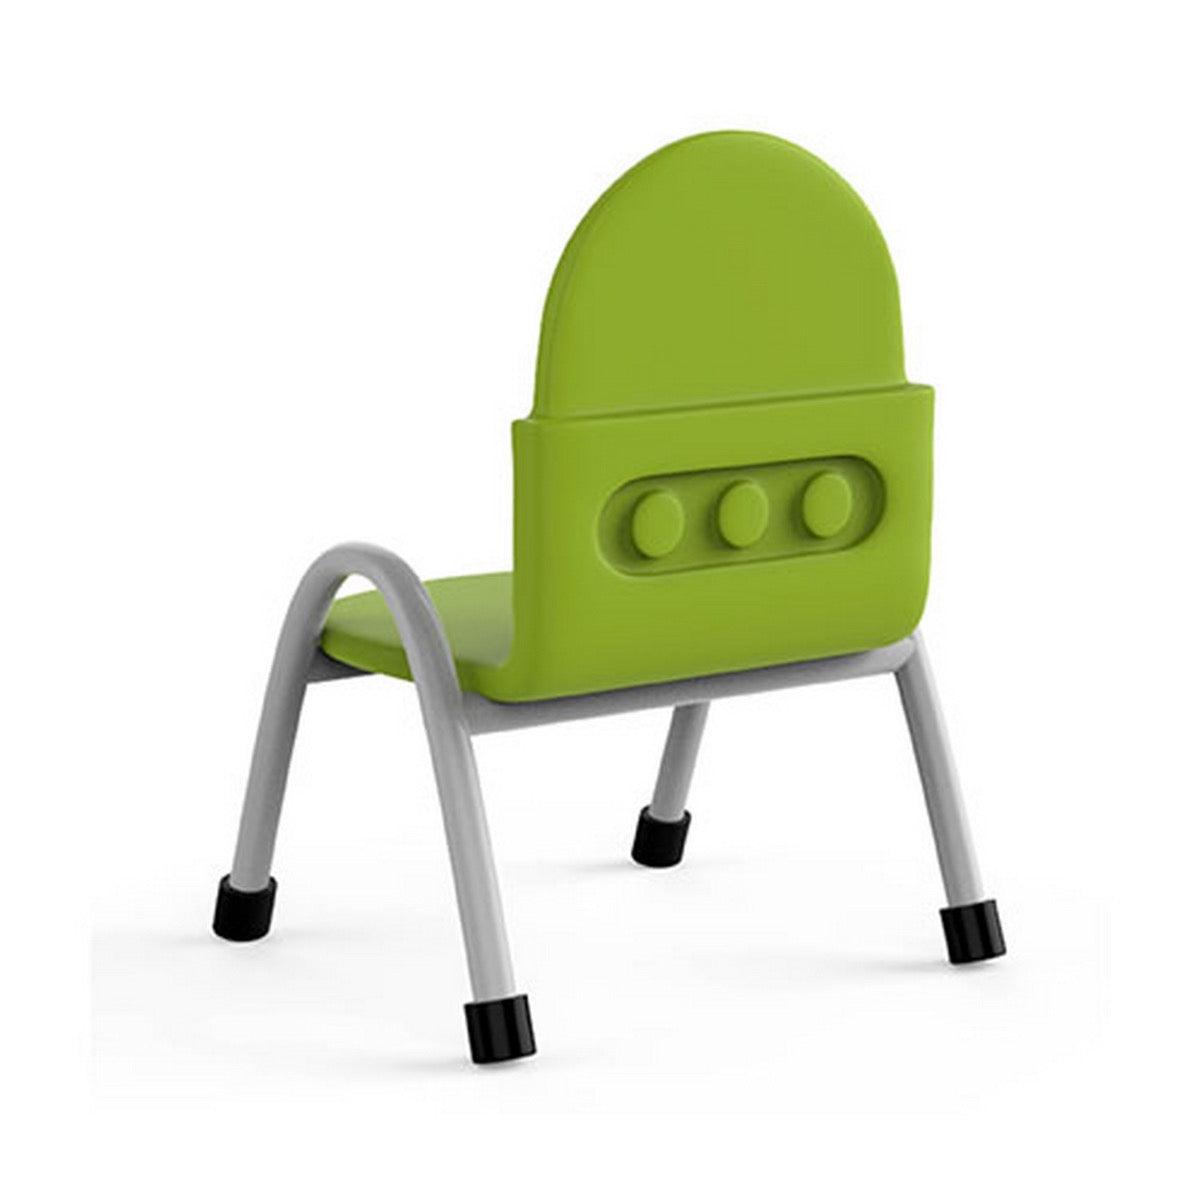 Ok Play Robo Chair, Study Chair, Sturdy And Durable Chair, Plastic Chair, Perfect For Home, Creches And School, Green, 5 to 10 Years, Height 12 Inches